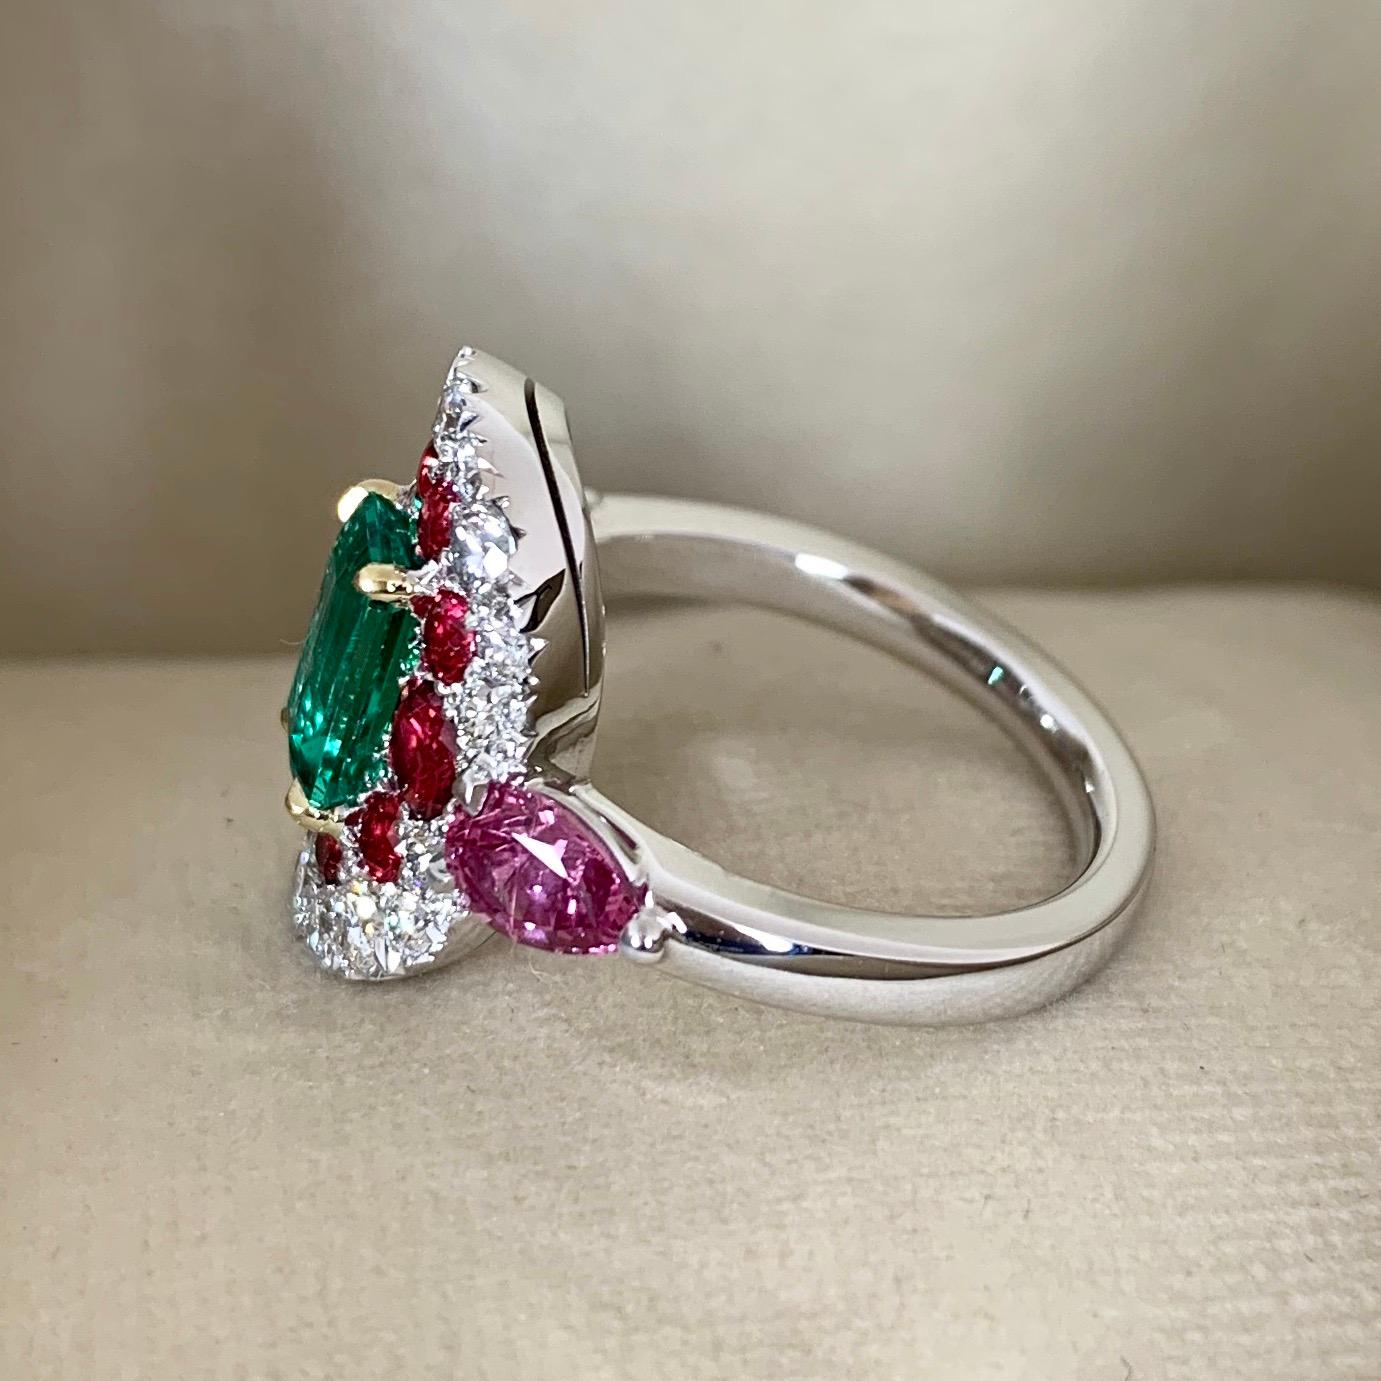 Introducing a one-of-a-kind ring that is sure to capture the attention of any jewelry connoisseur. Crafted from 18K white gold, this ring features prongs in yellow gold.
The center of this exquisite ring boasts a stunning, unoiled Colombian emerald